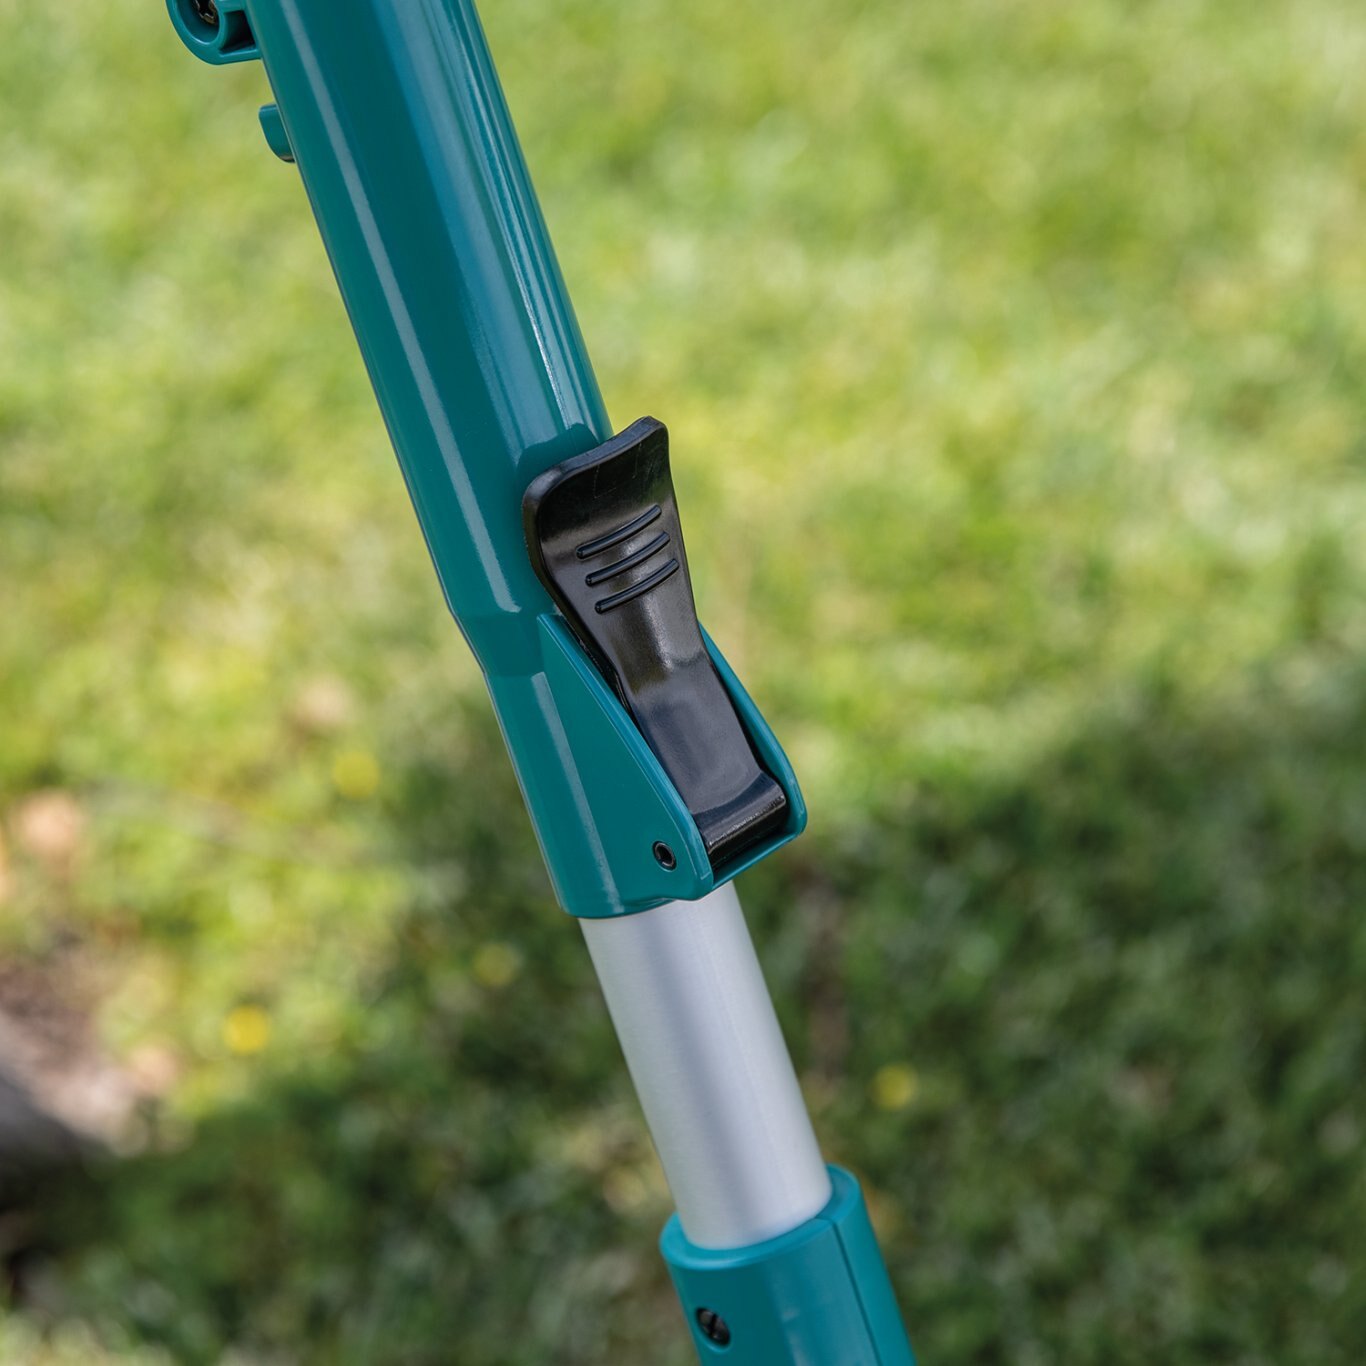 Makita 18V LXT® Lithium?Ion Cordless 18 Telescoping Articulating Pole Hedge Trimmer Kit (4.0Ah)